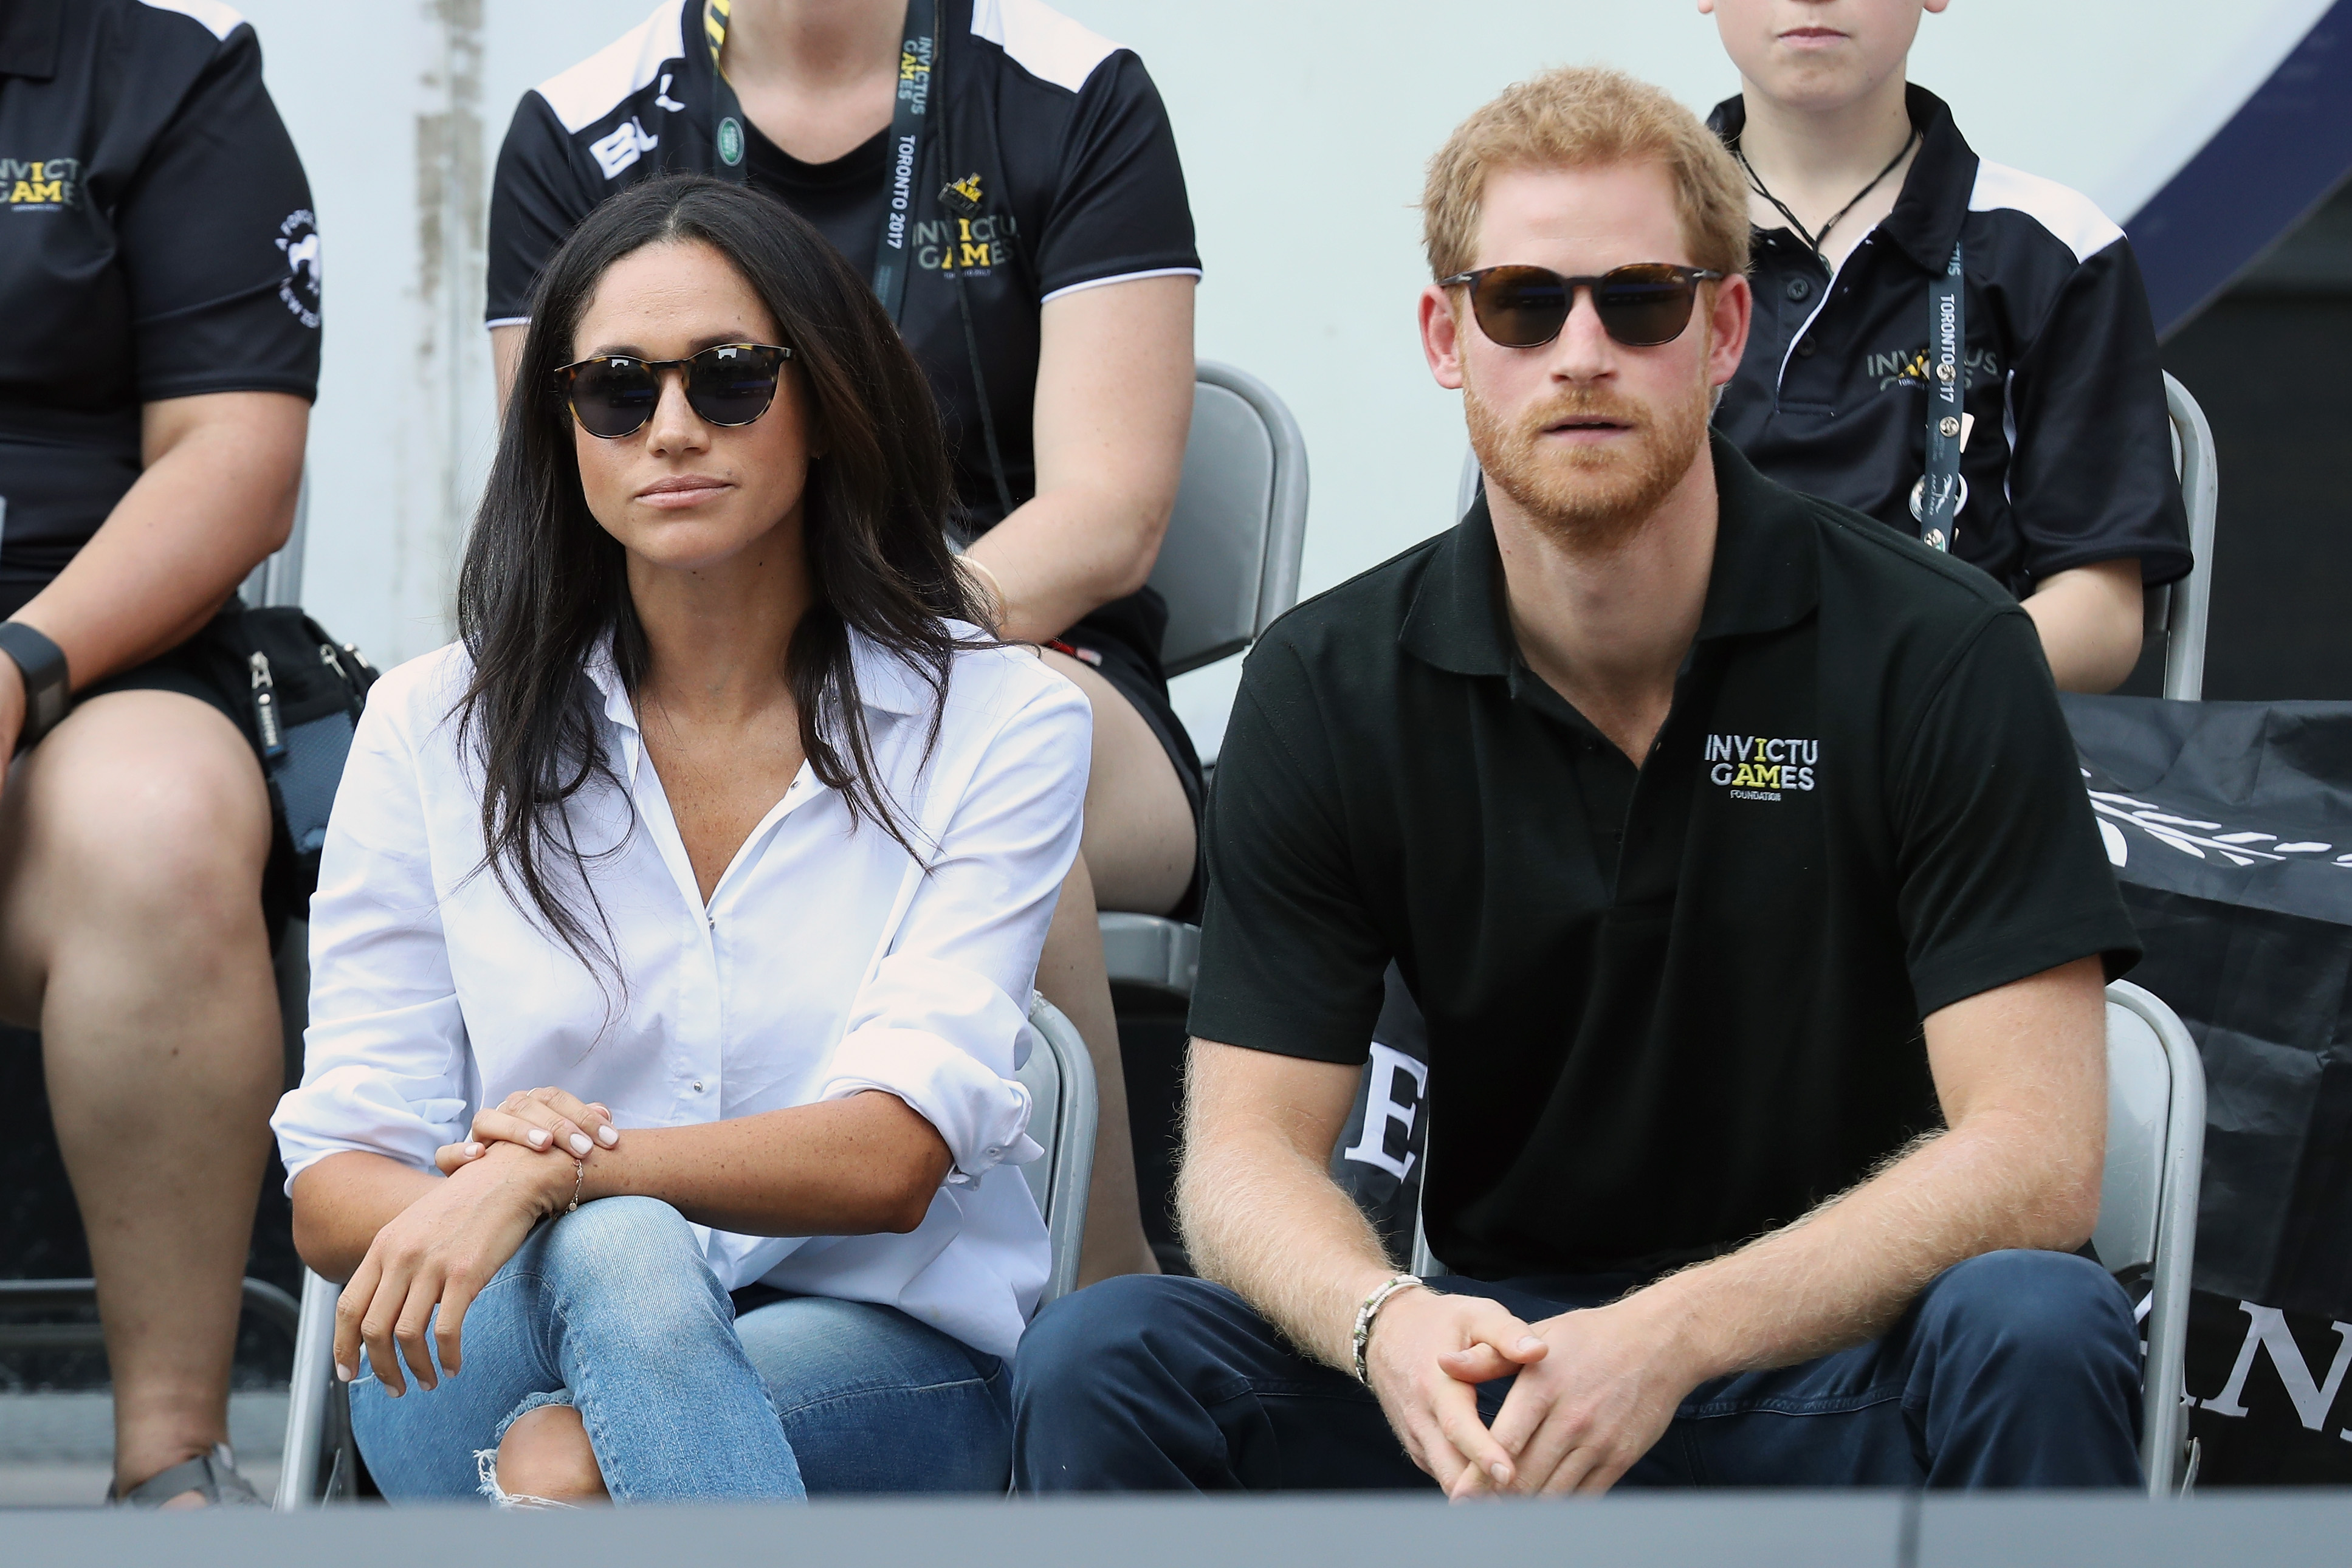 Meghan Markle and Prince Harry watch the Invictus Games.